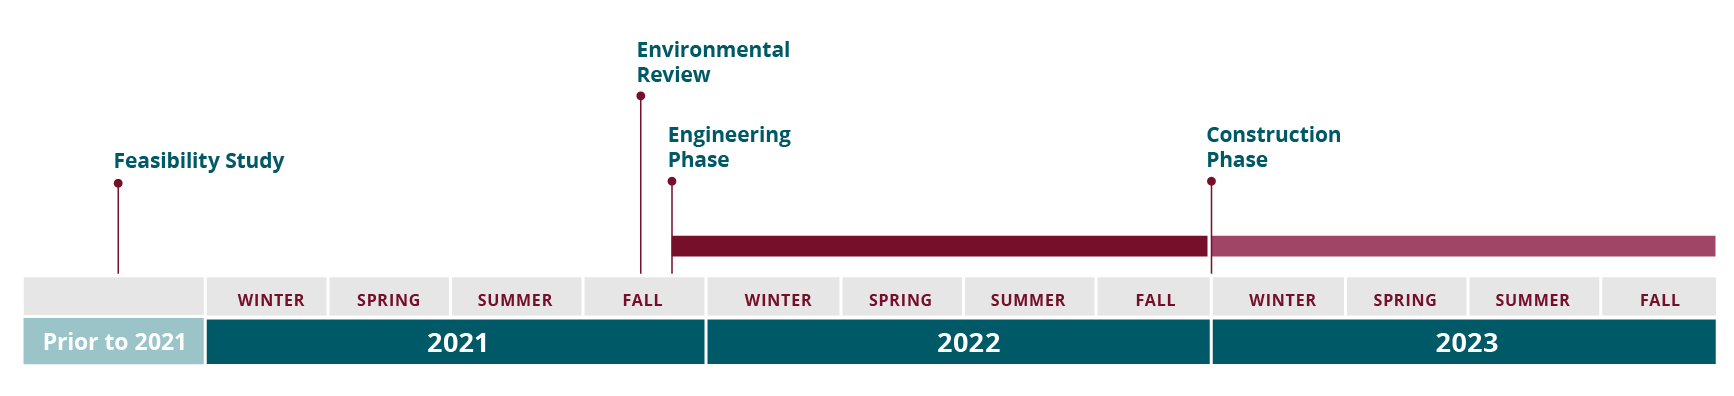 Prior to 2021 was feasibility study, Spring 2021 environmental review and engineering phase begins and continues to end of Fall 2022.